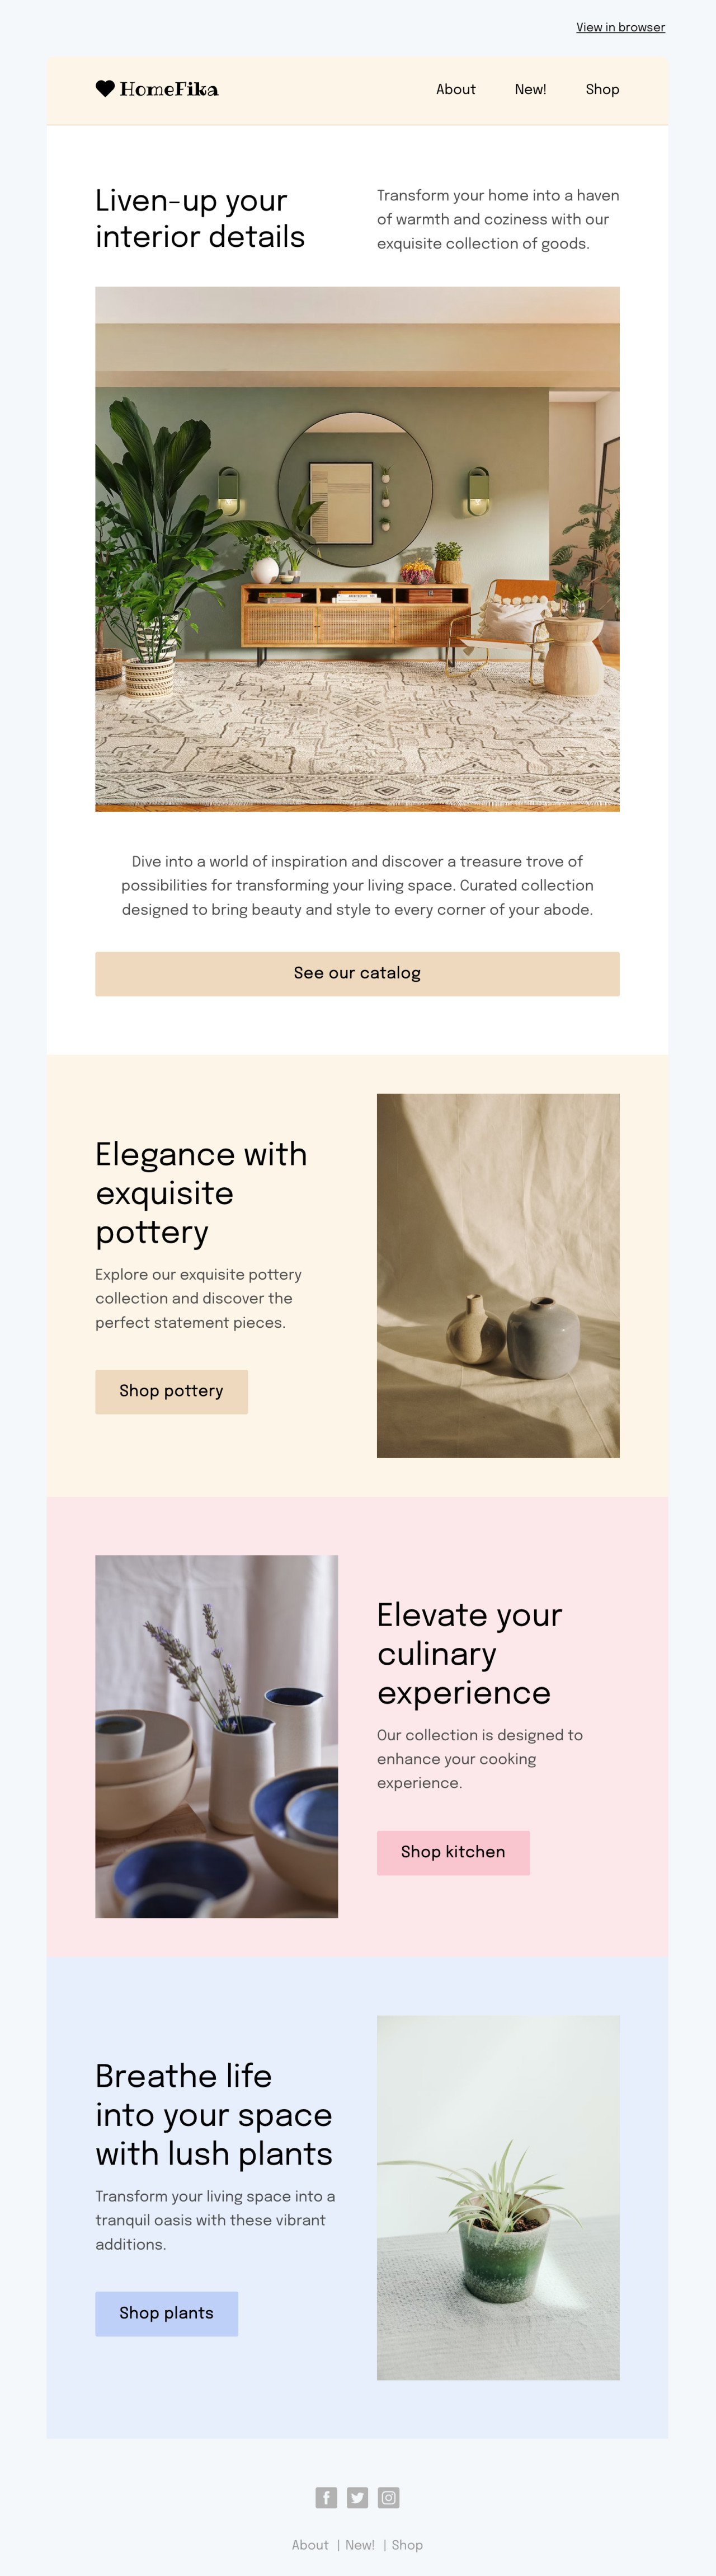 Home products gift ideas template - Made by MailerLite